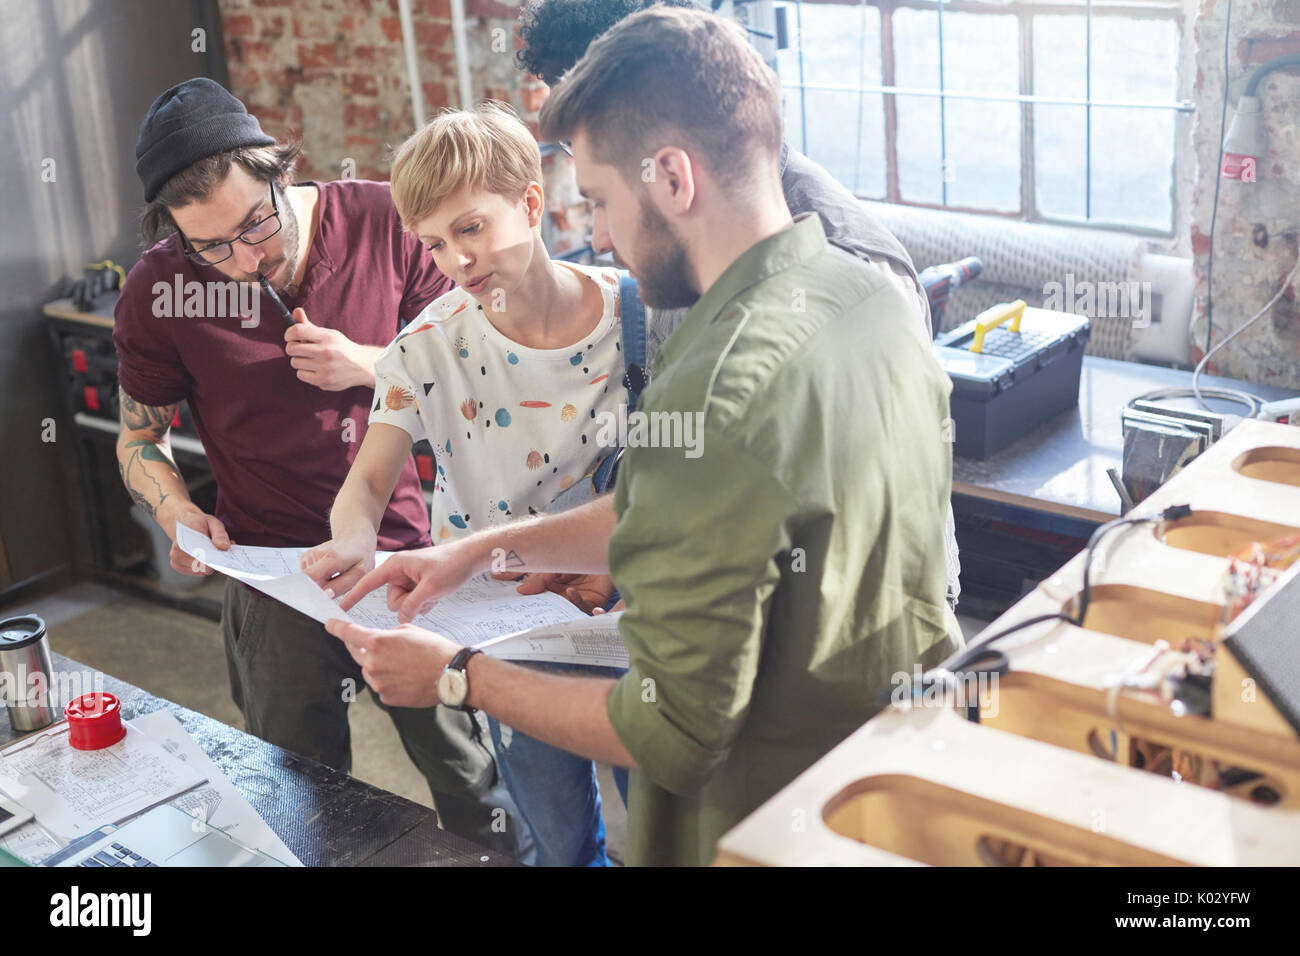 Designers meeting, reviewing plans in workshop Stock Photo